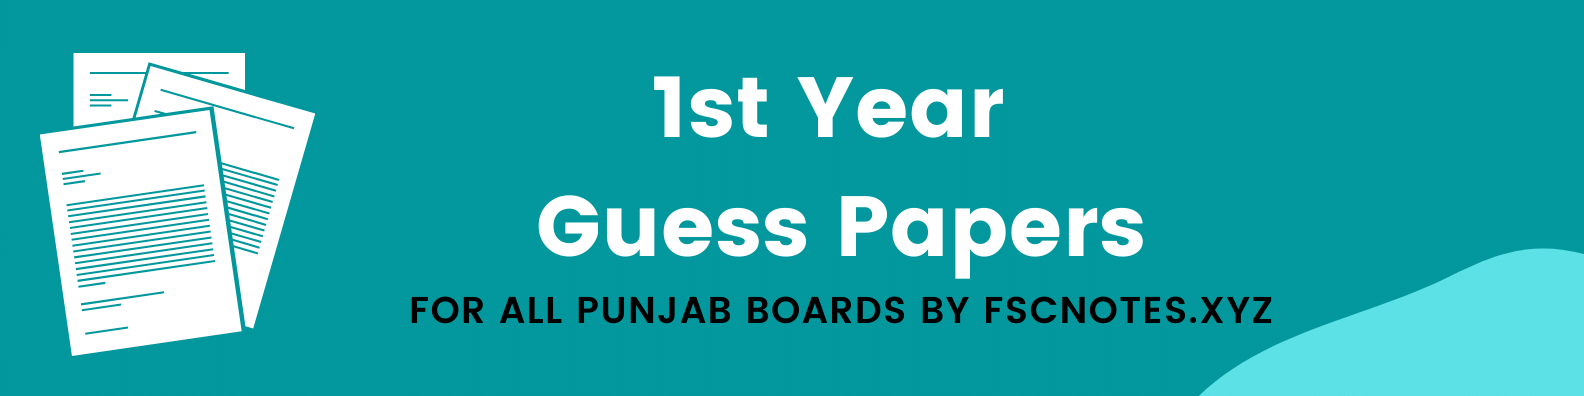 1st Year Guess Papers 2021